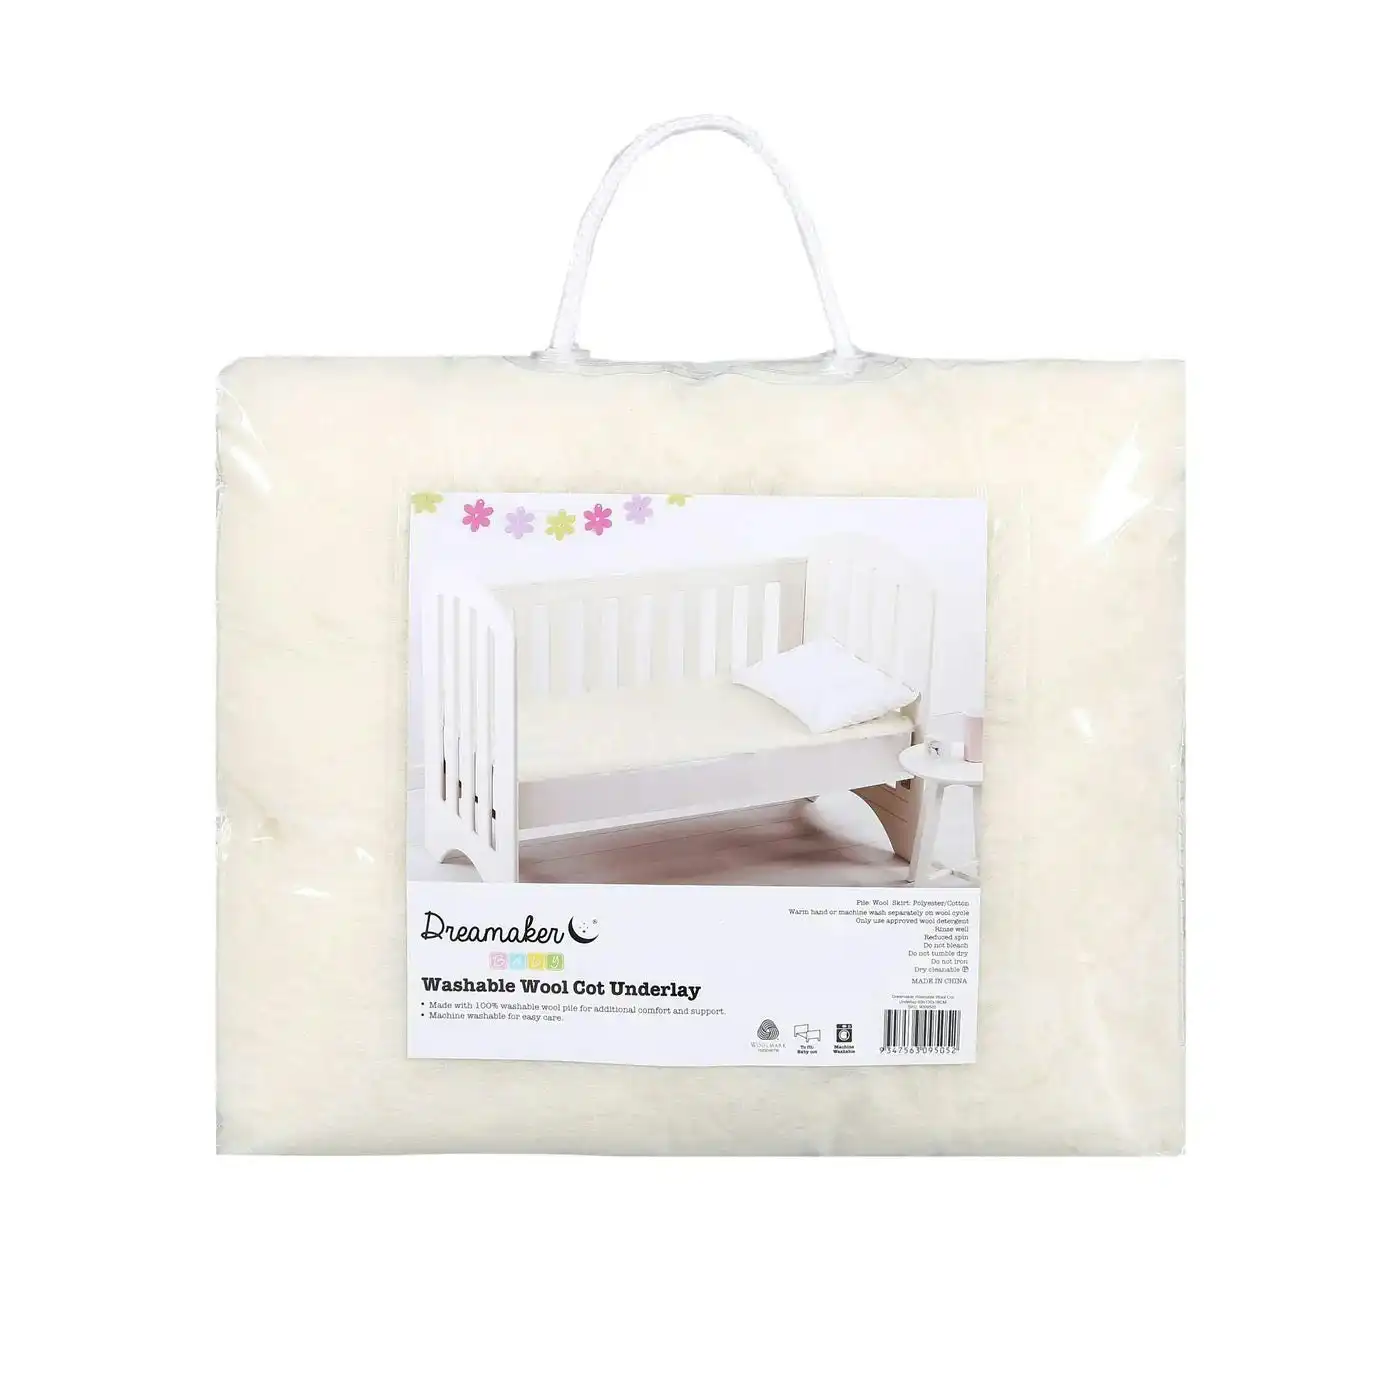 Dreamaker Baby Washable Wool Cot Underlay